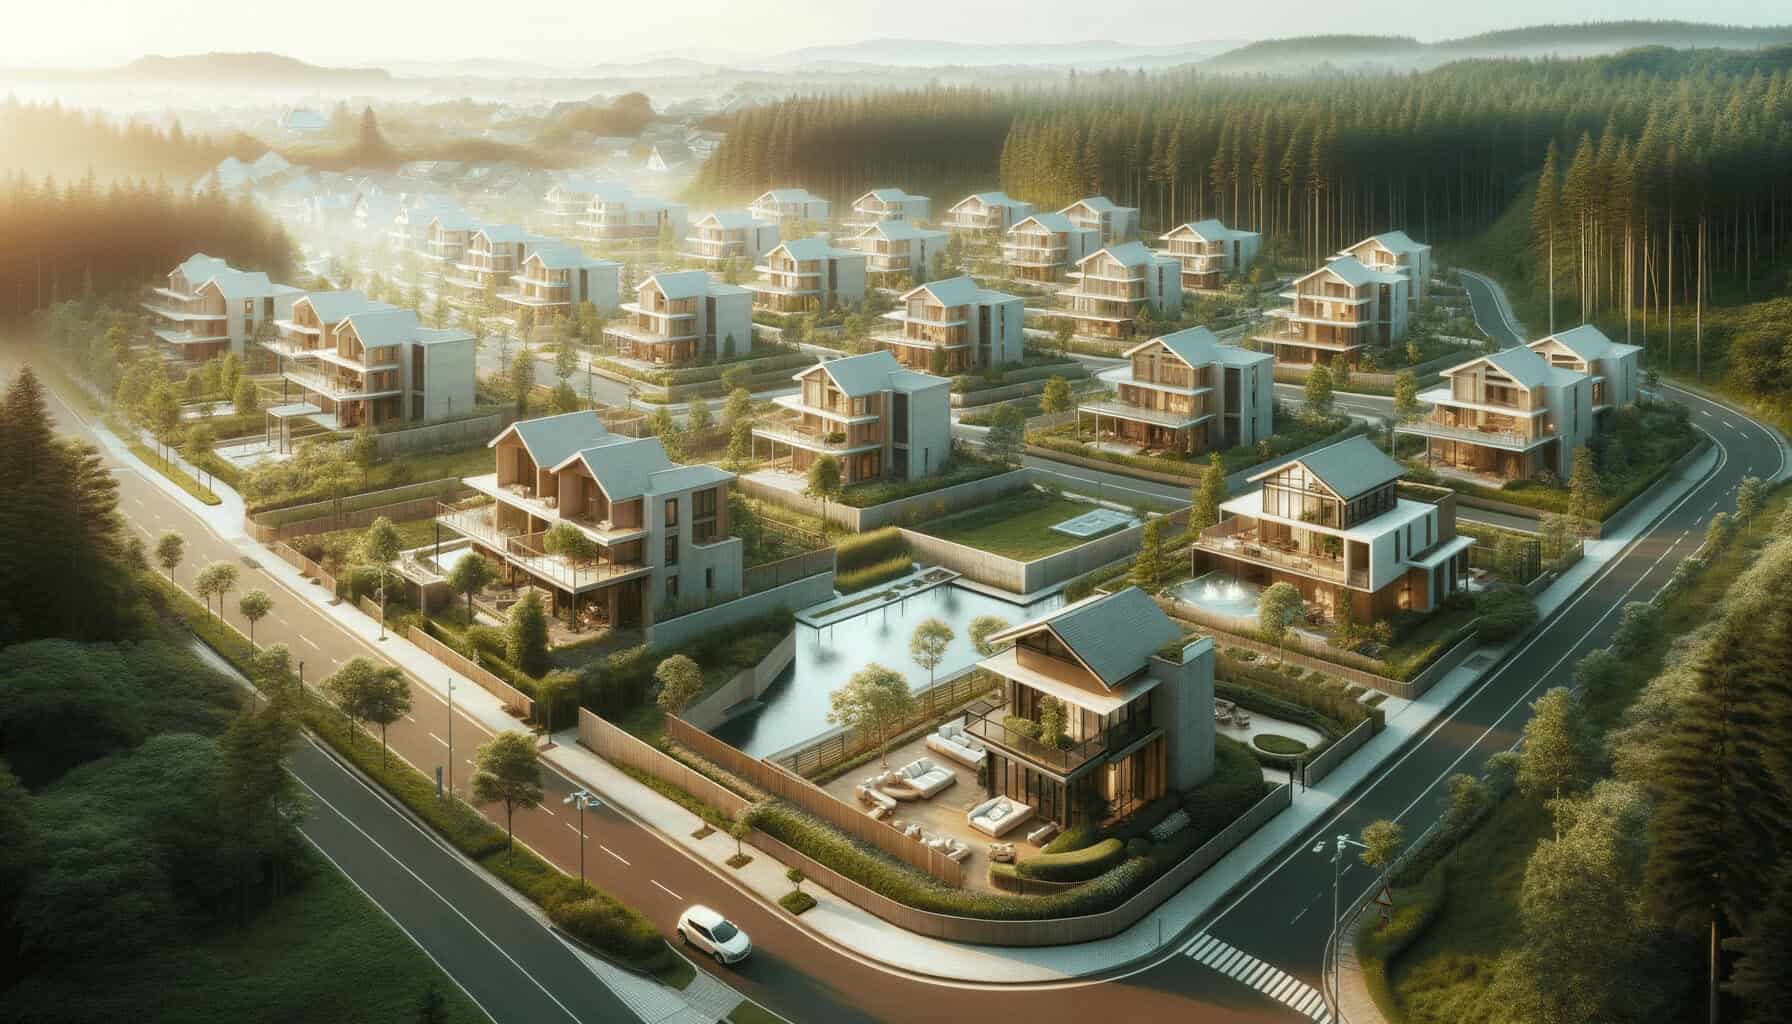 DALL·E 2023 10 16 13.52.59 Photo of a serene residential area with multiple houses built using modern construction techniques surrounded by nature